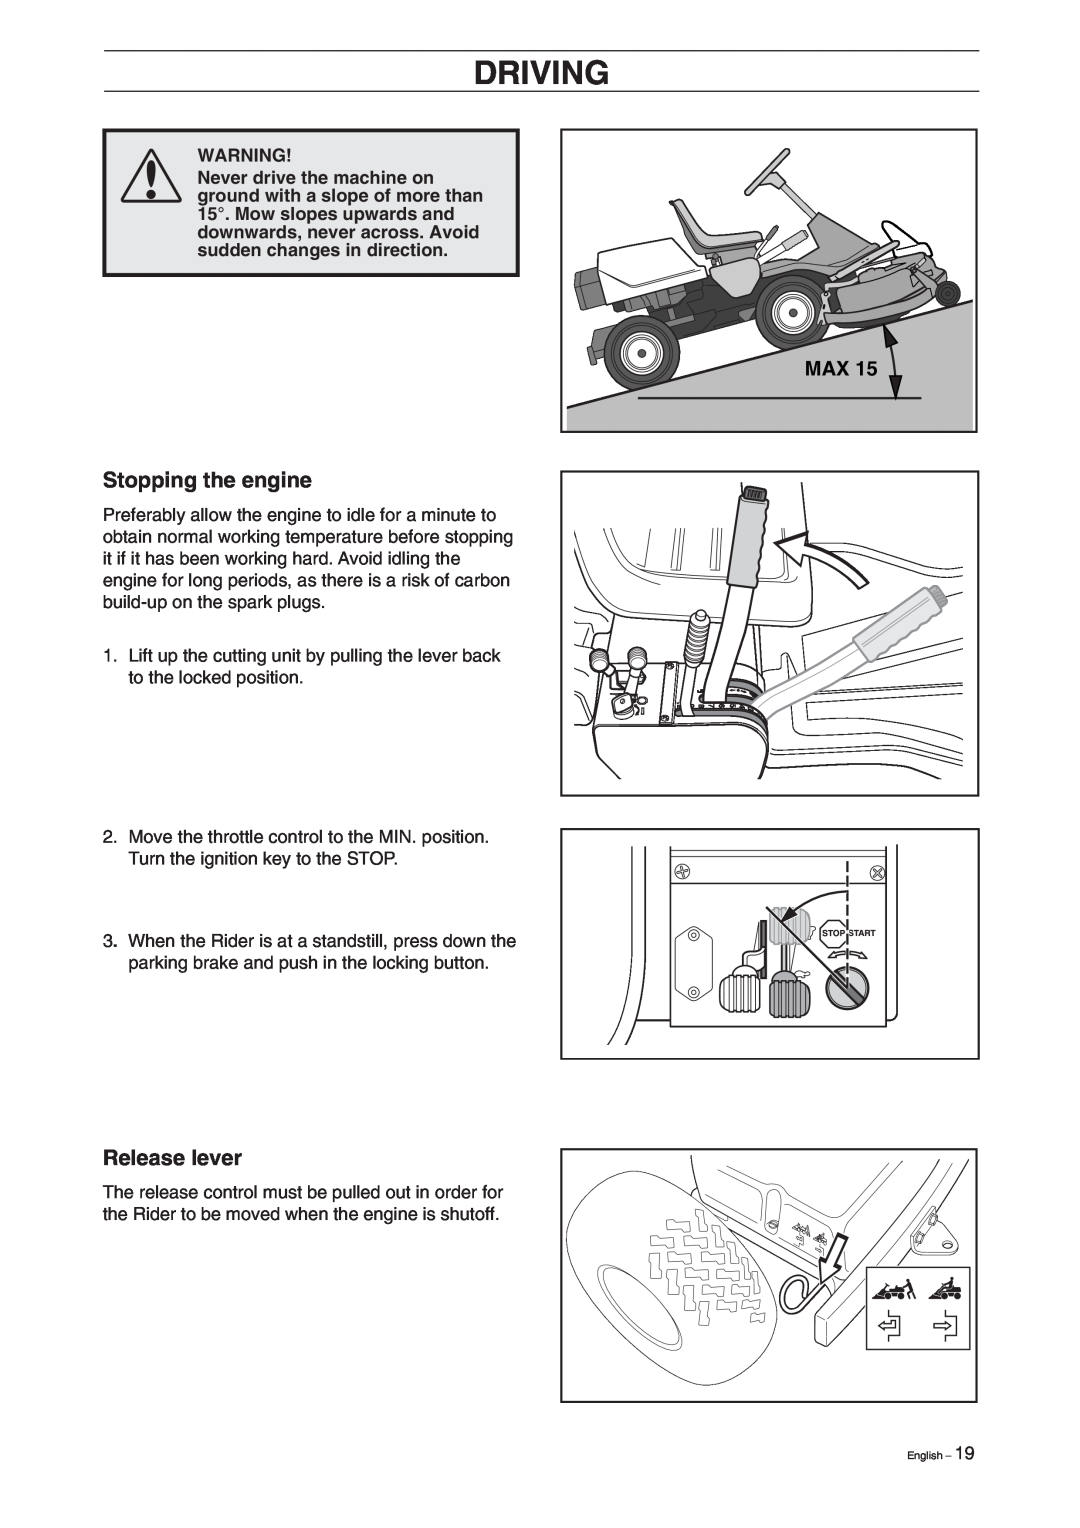 Husqvarna 15V2 manual Stopping the engine, Release lever, Driving 